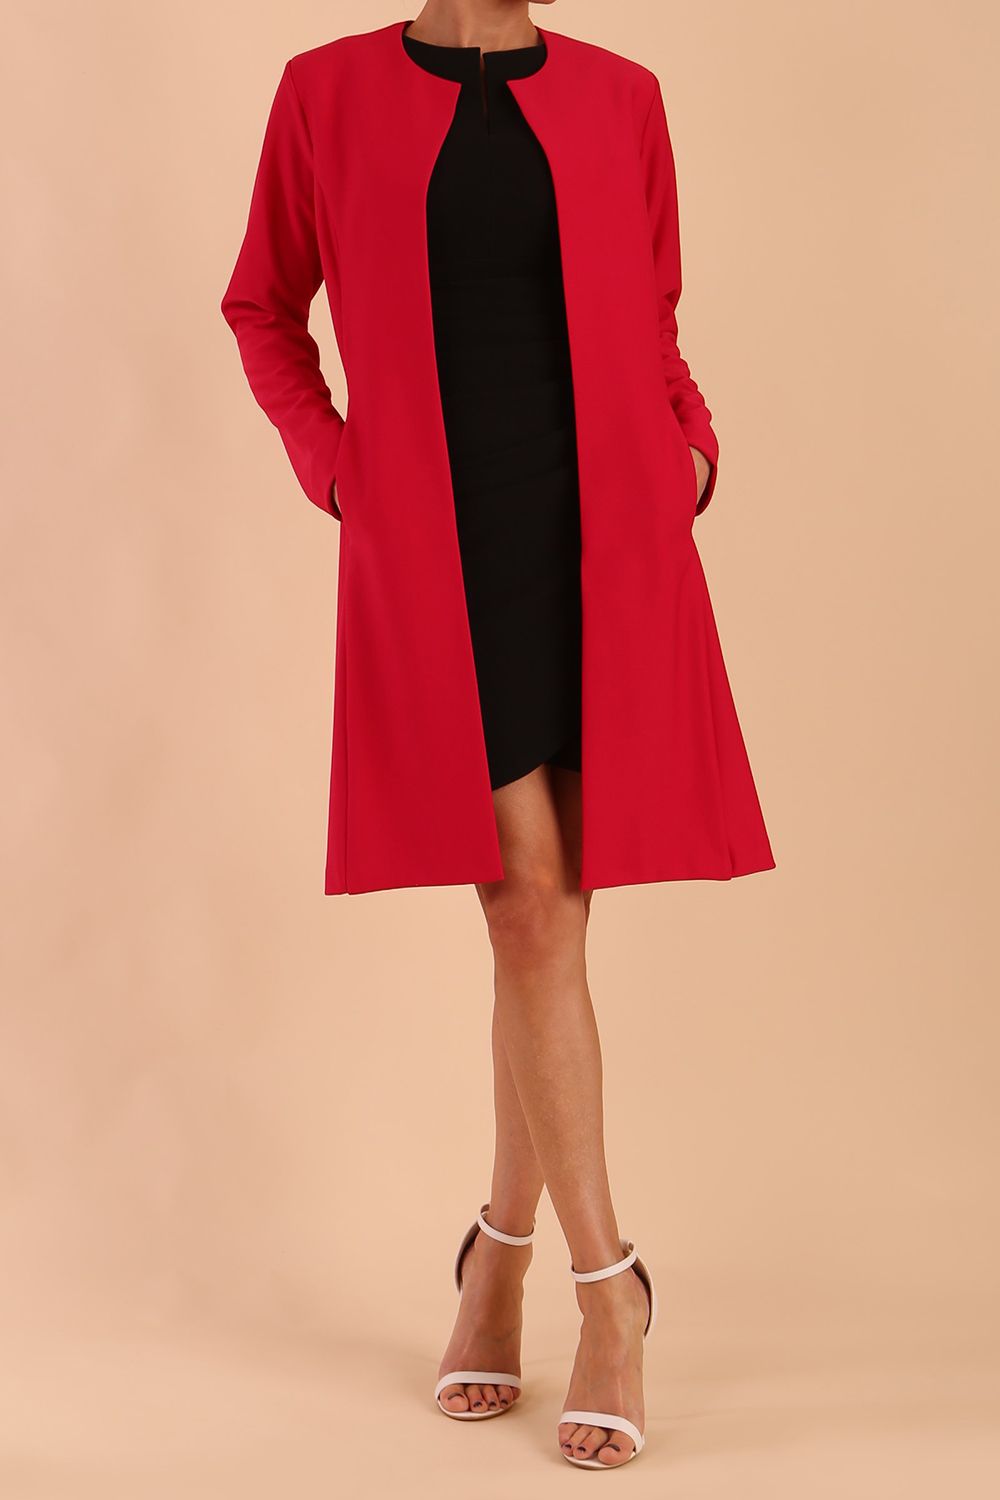 model wearing diva catwalk teal coat with long sleeves and a belt in Rose Red front